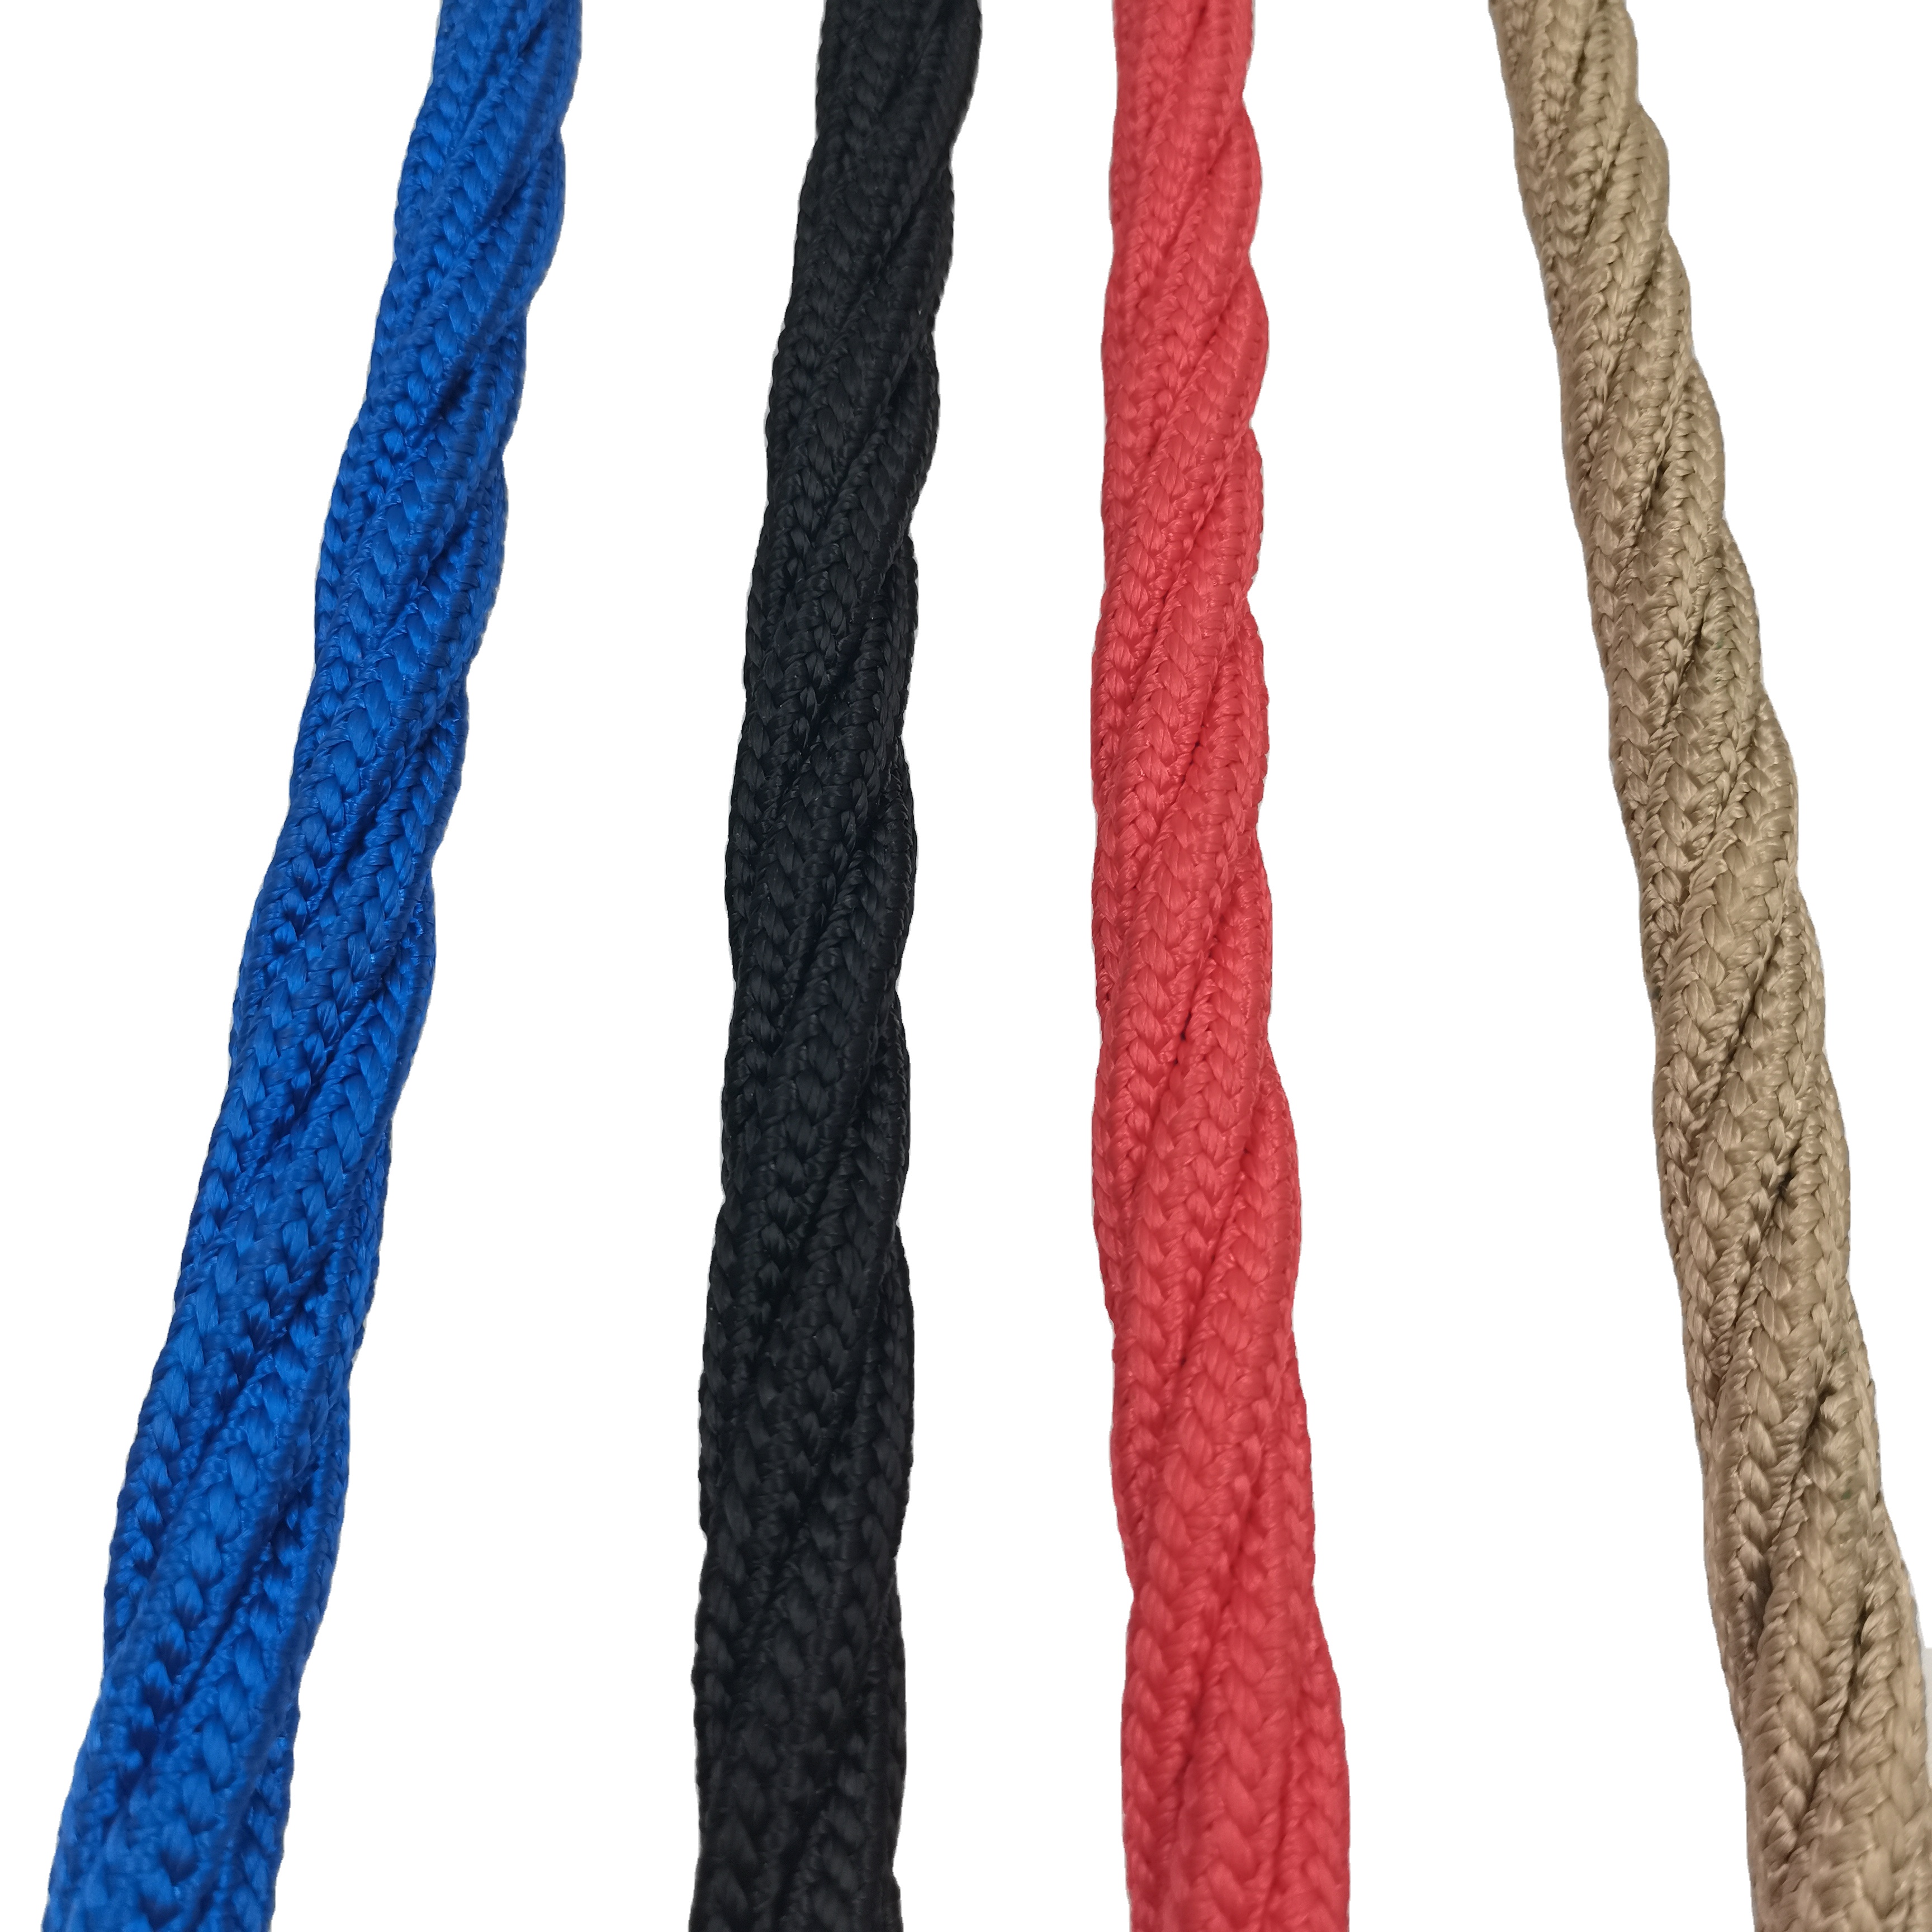 New Fashion Design for 3 Strand 6mm Sisal Rope - 4 Strand Playground Polyester Steel Reinforced Rope 16mm – Florescence